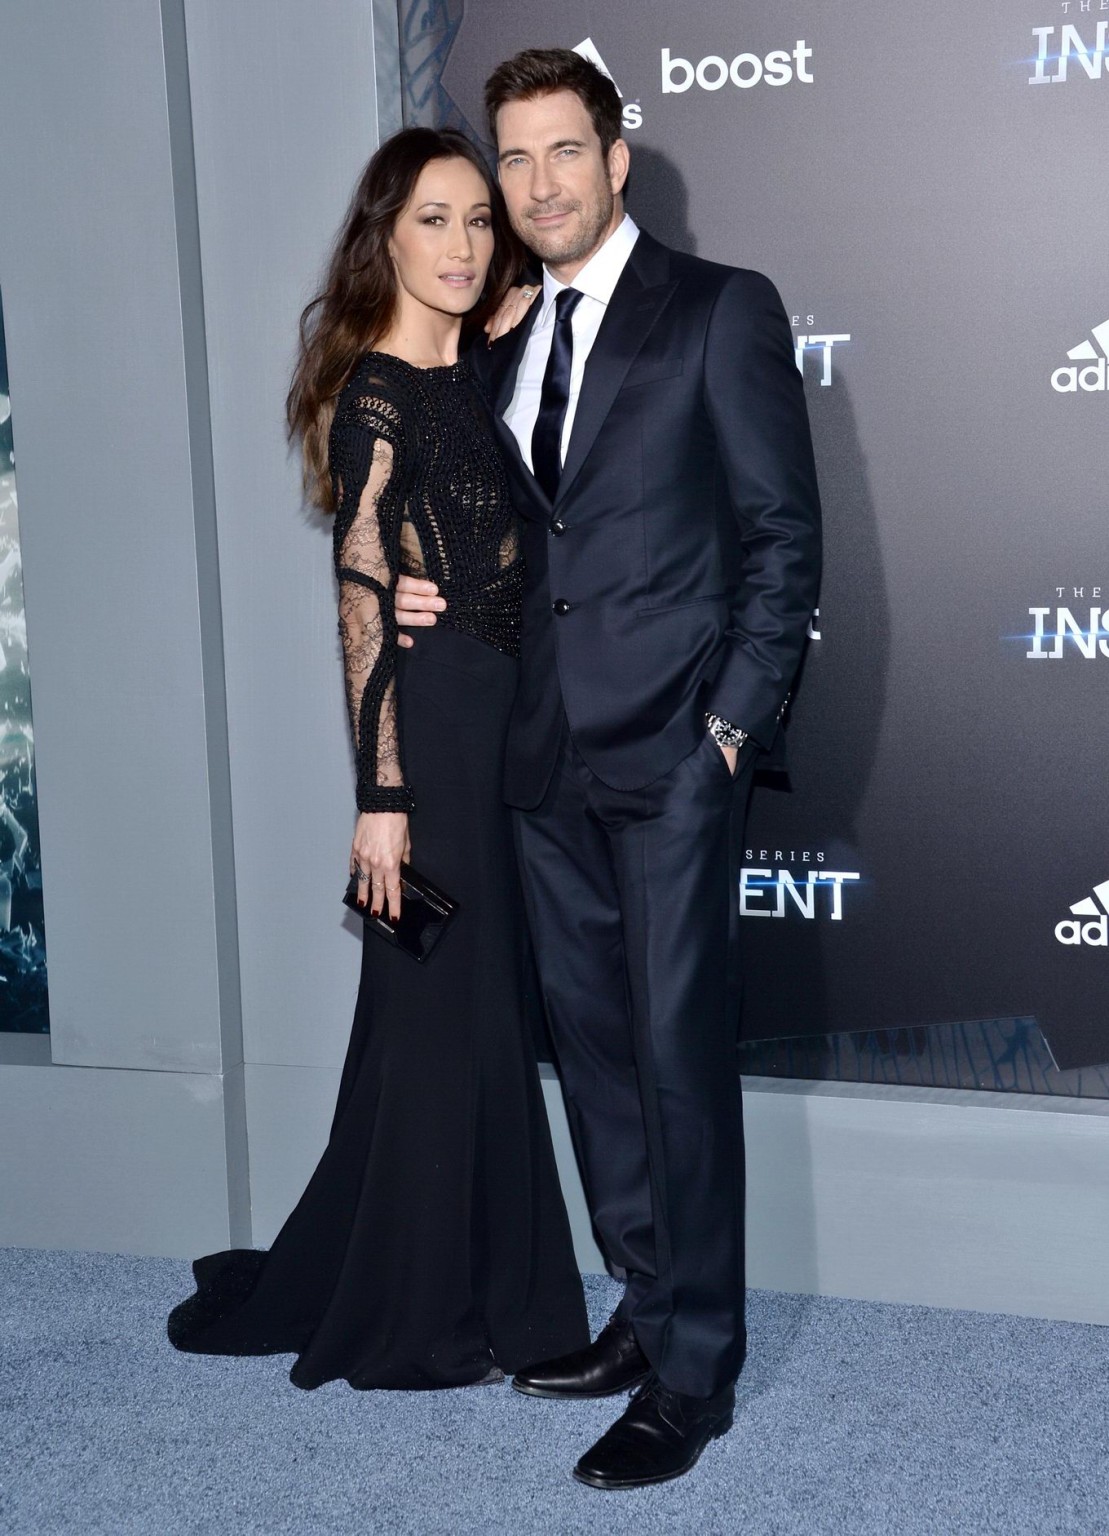 Maggie Q braless wearing a partially see through dress at the Insurgent premiere #75169867